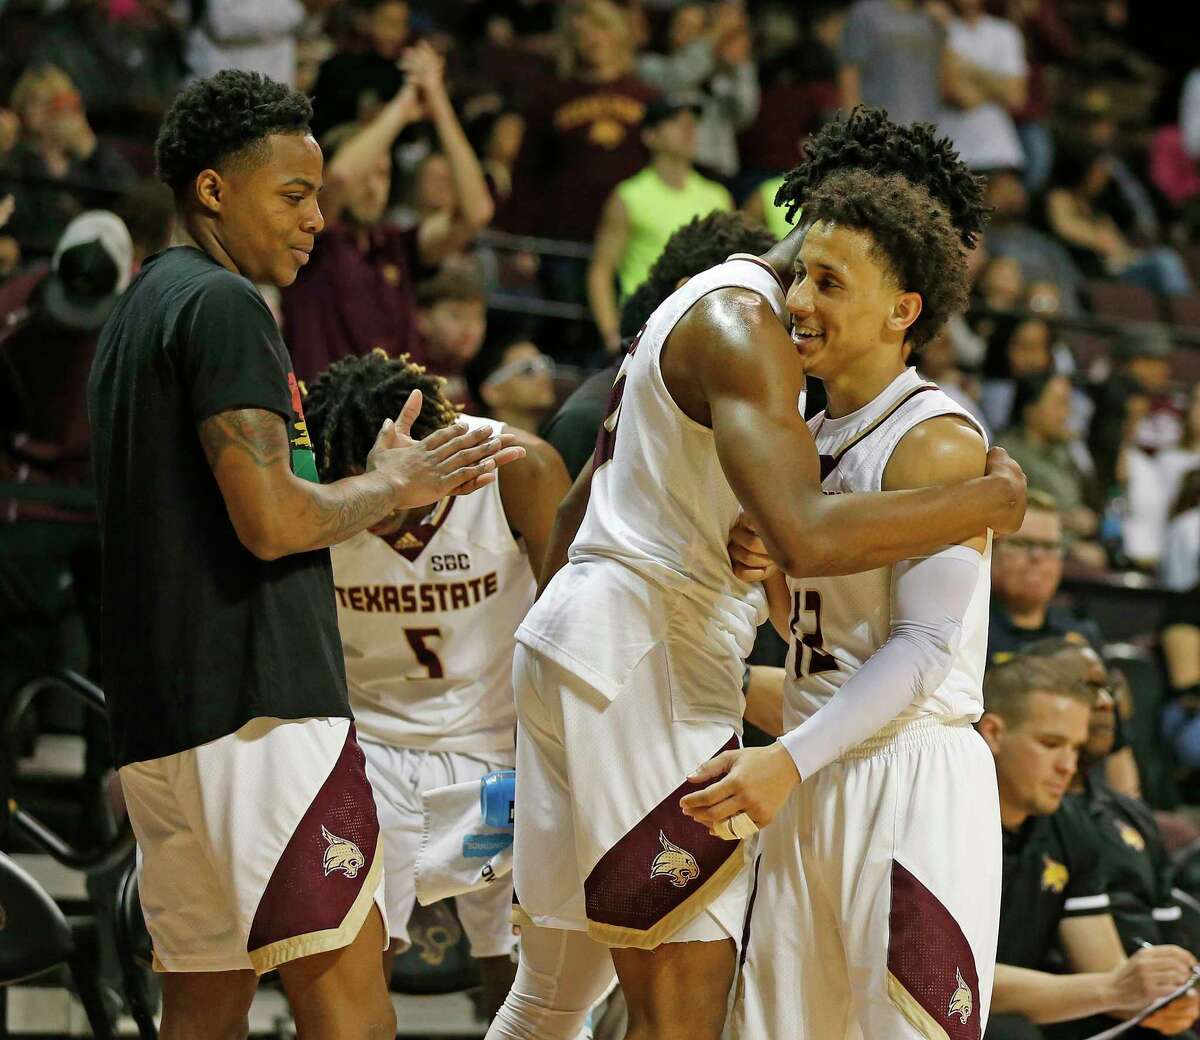 Texas State guard Mason Harrell (12) is hugged as he comes to the bench late in the second half. Texas State defeated Little Rock 68-50 at Strahan Arena in San Marcos on Saturday, Feb. 19, 2022